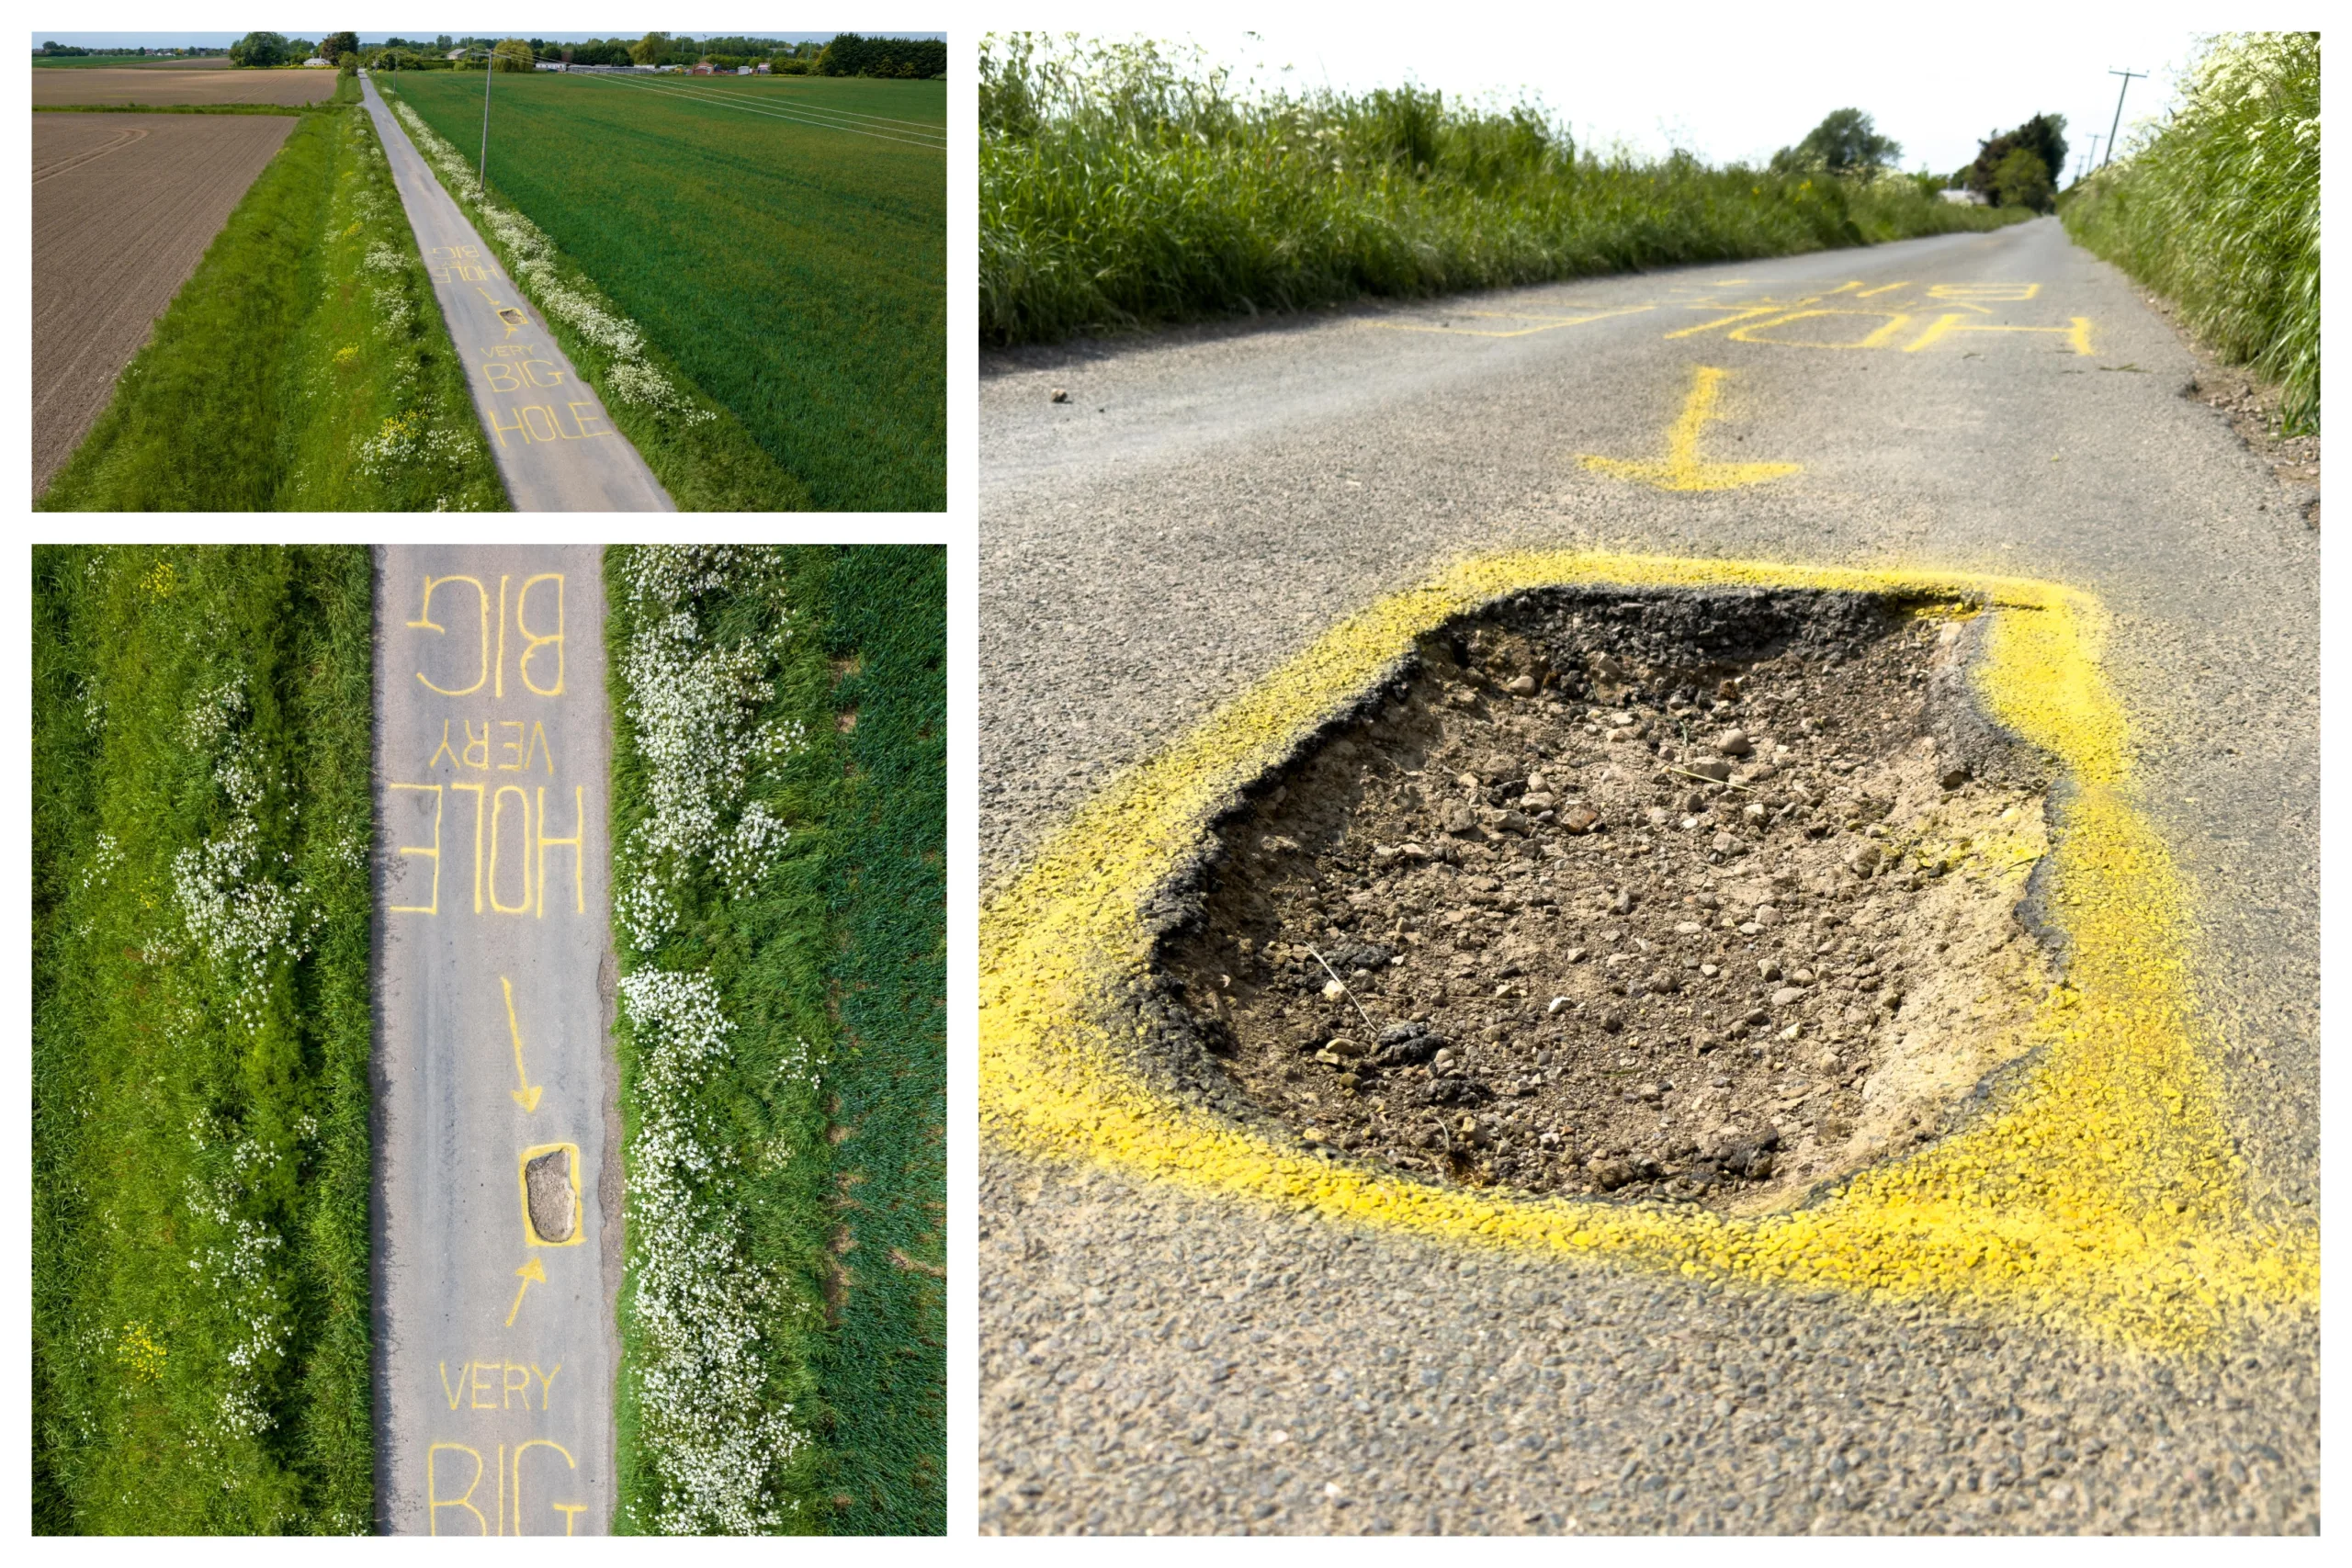 The artistic touch to draw attention to the pothole has appeared at Murrow near Wisbech and could be there for a while. PHOTO: Terry Harris for CambsNews